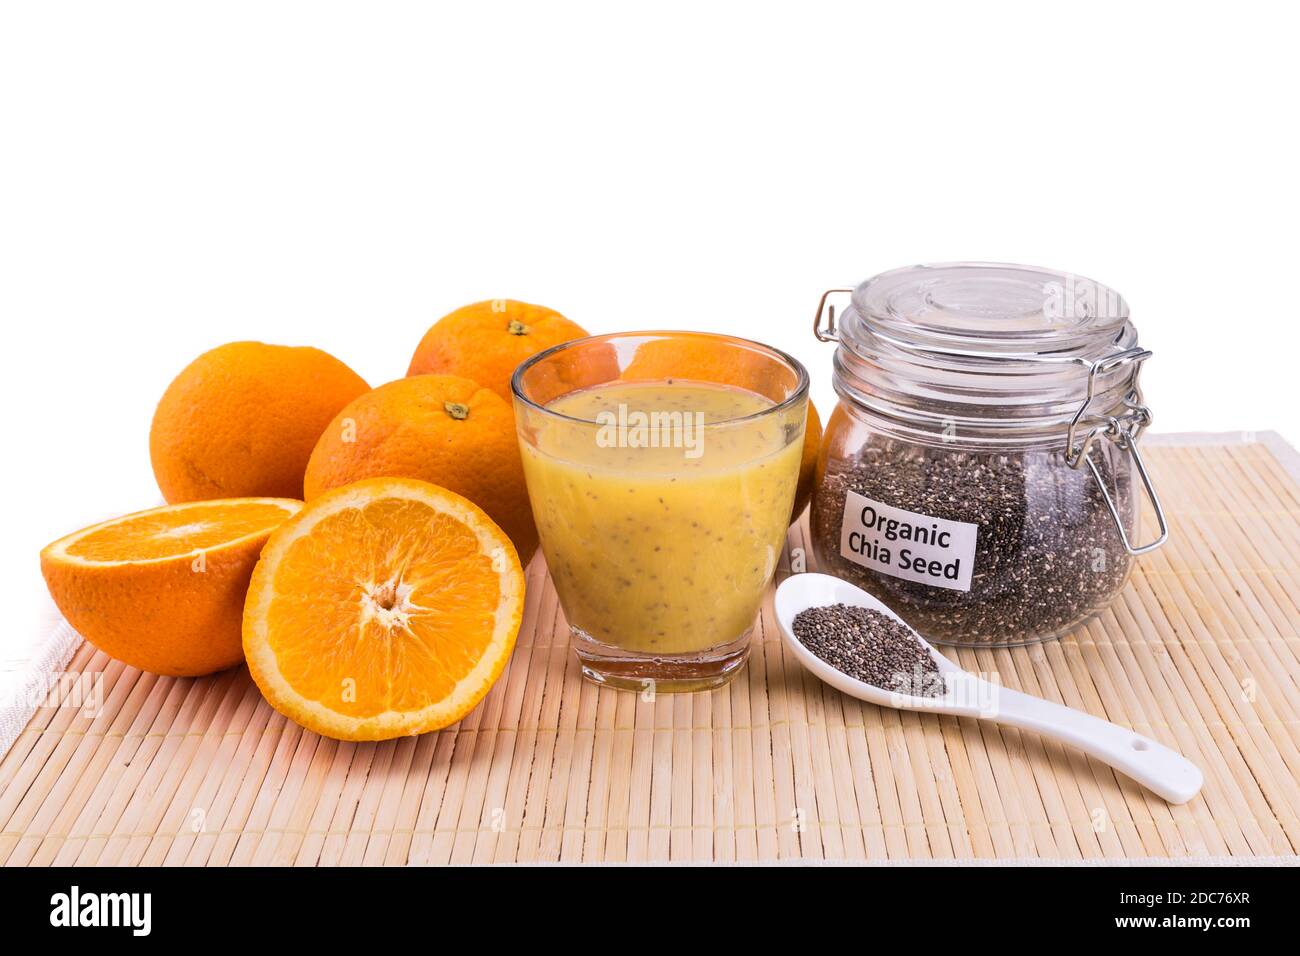 Chia seeds with fresh orange juice, healthy and nutritious anti-oxidant superfood drinks Stock Photo